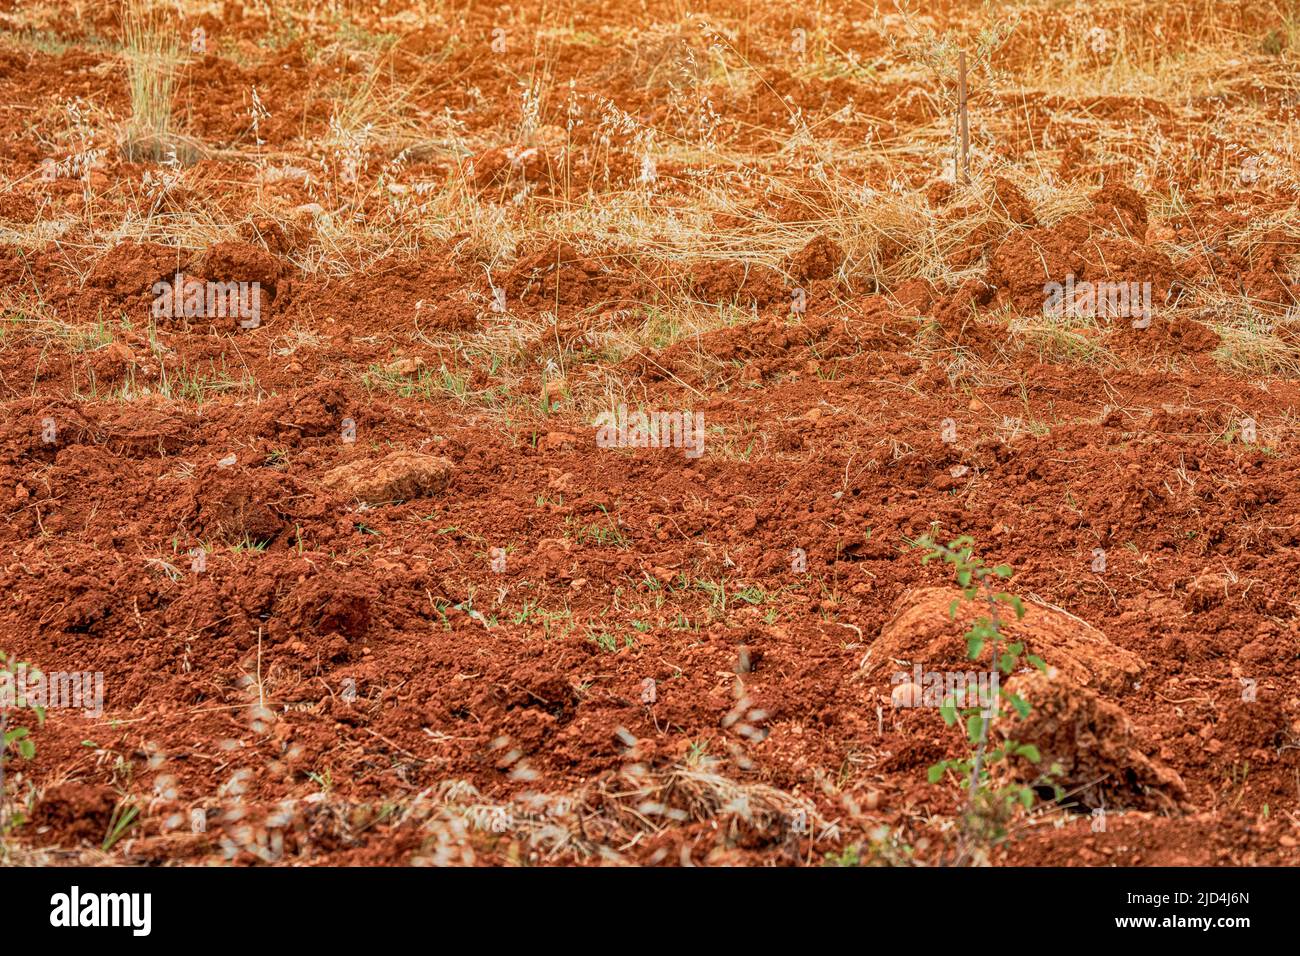 Red clay soils or Ultisol plowed field for planting and cultivating crops in tropical country. Agriculture in extreme climatic conditions Stock Photo